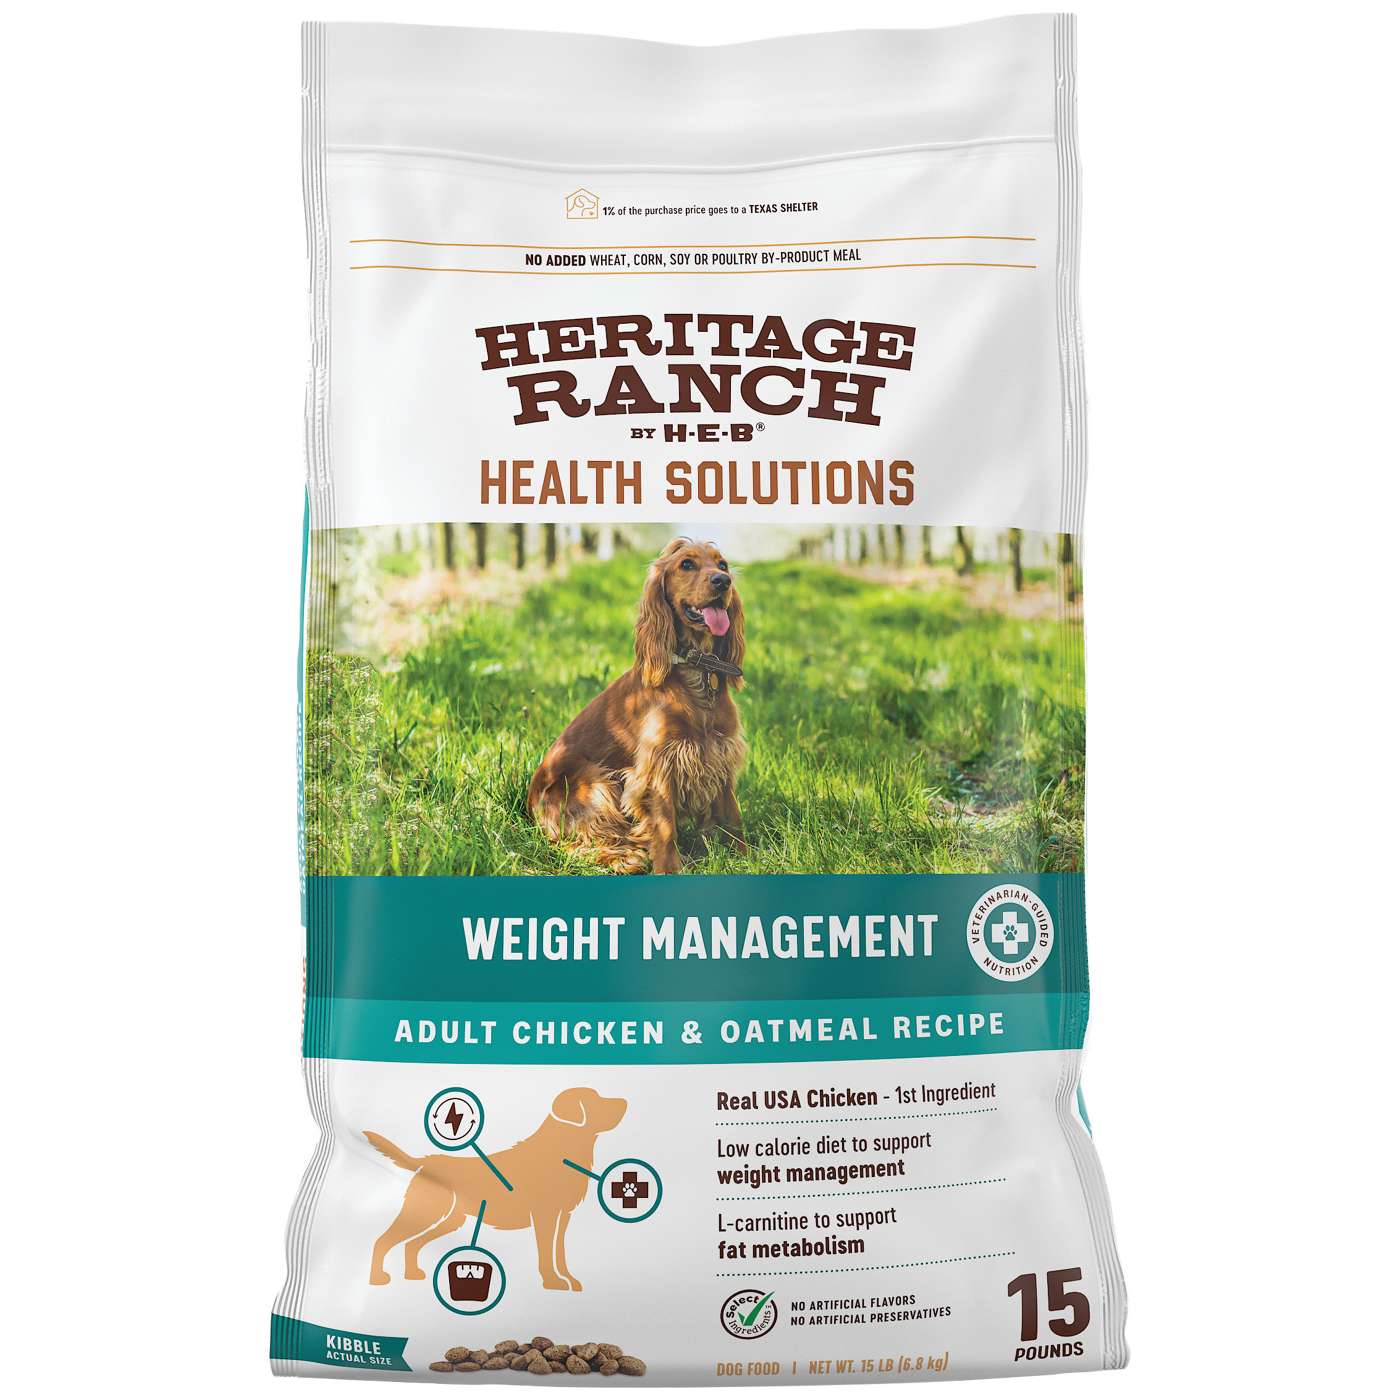 Heritage Ranch by H-E-B Weight Management Chicken & Oatmeal Dry Dog Food; image 1 of 2